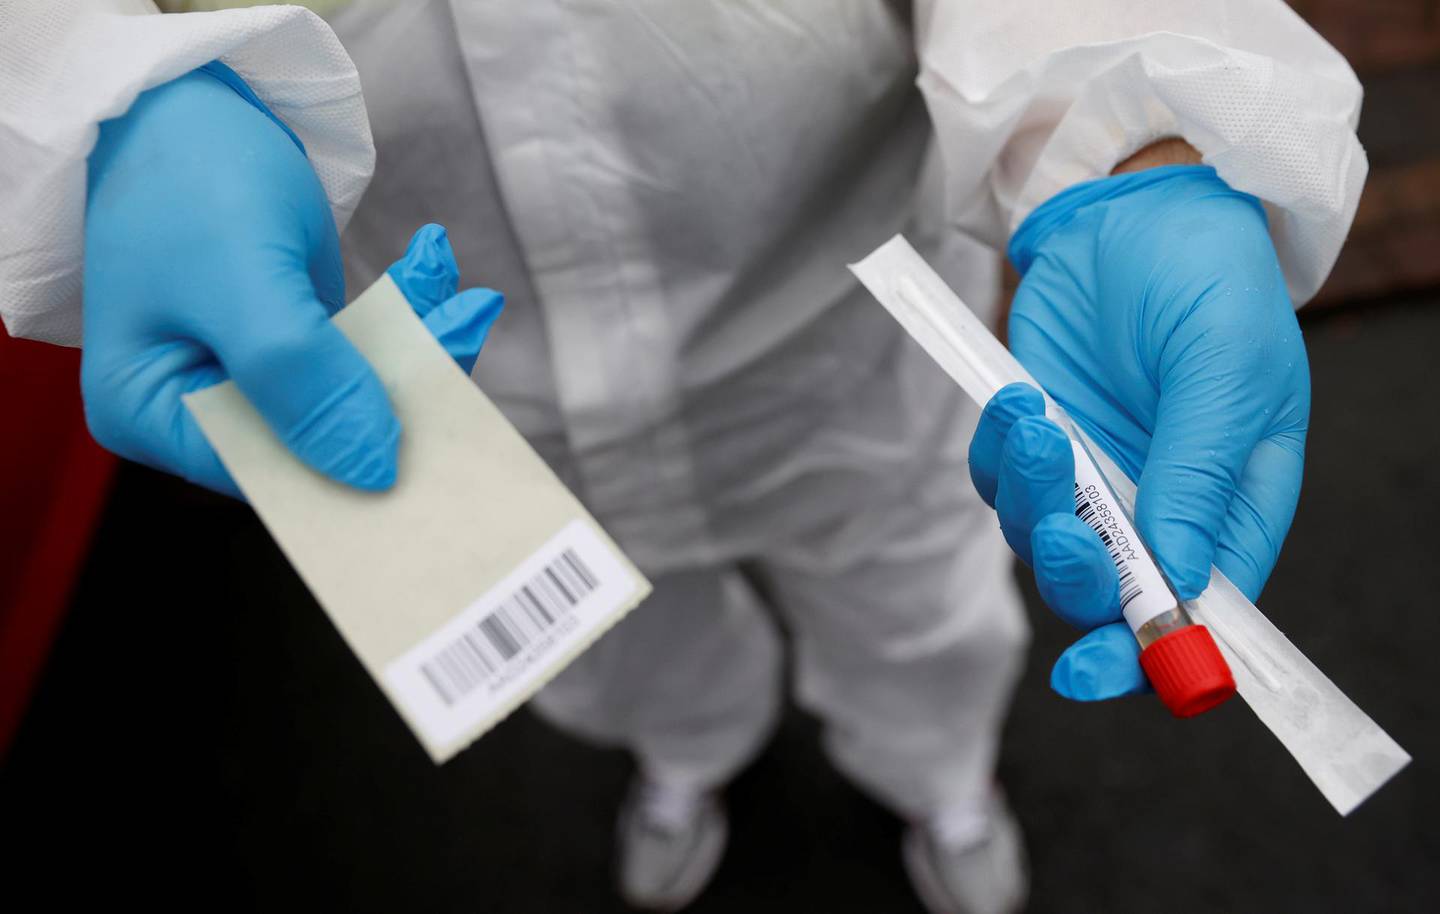 A member of the community swabbing team holds a testing kit before he carries out a doorstep COVID-19 testing following the outbreak of the coronavirus disease (COVID-19) in Chadderton, Britain, September 30, 2020. Picture taken September 30, 2020.  To match Special Report HEALTH-CORONAVIRUS/BRITAIN-NEWWAVE    REUTERS/Phil Noble